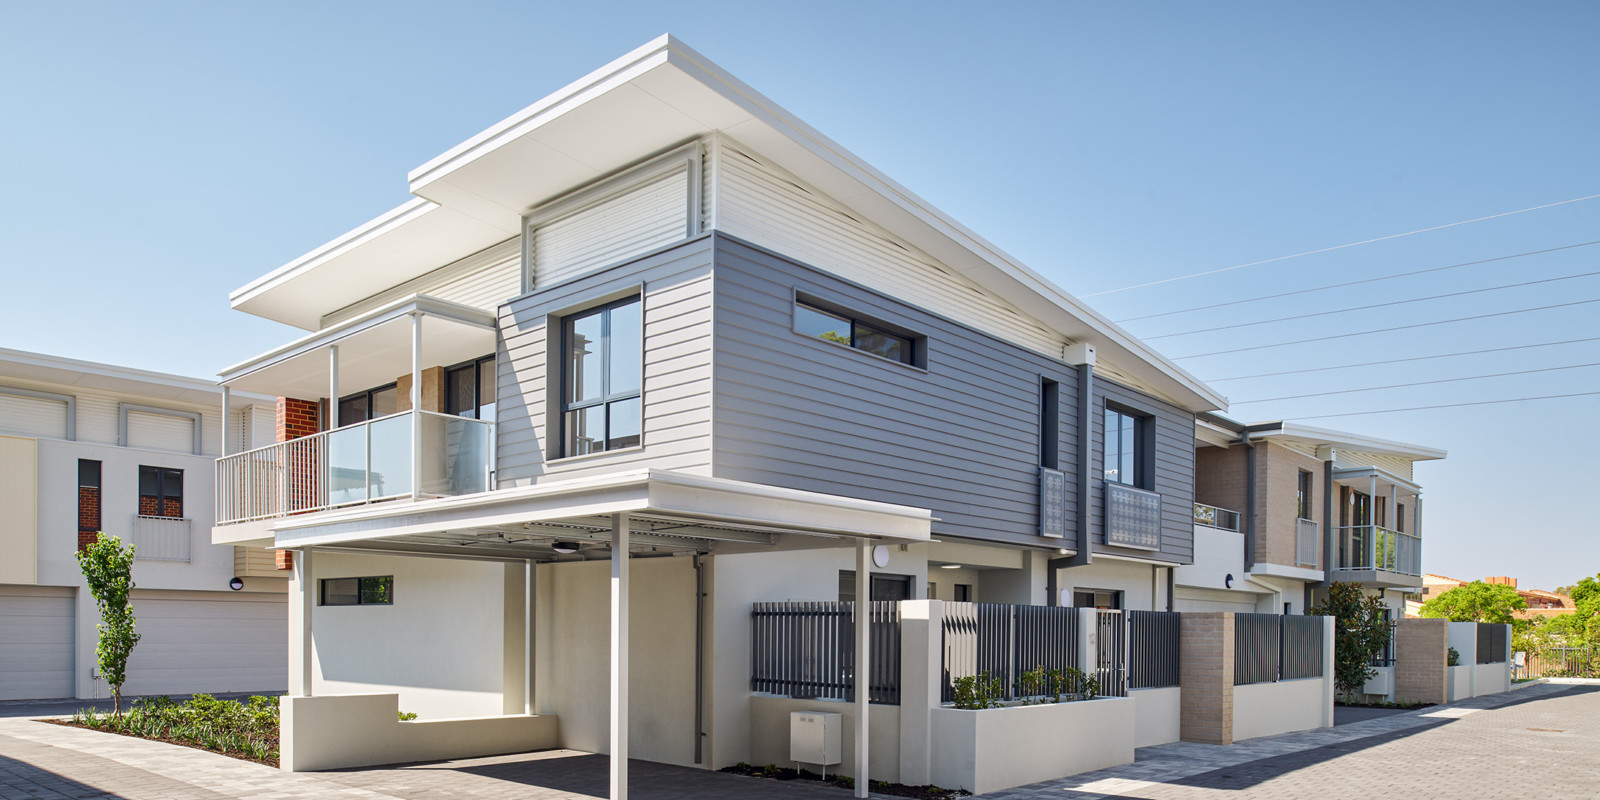 Mill Street Apartments, Cannington | Dale Alcock Projects Perth